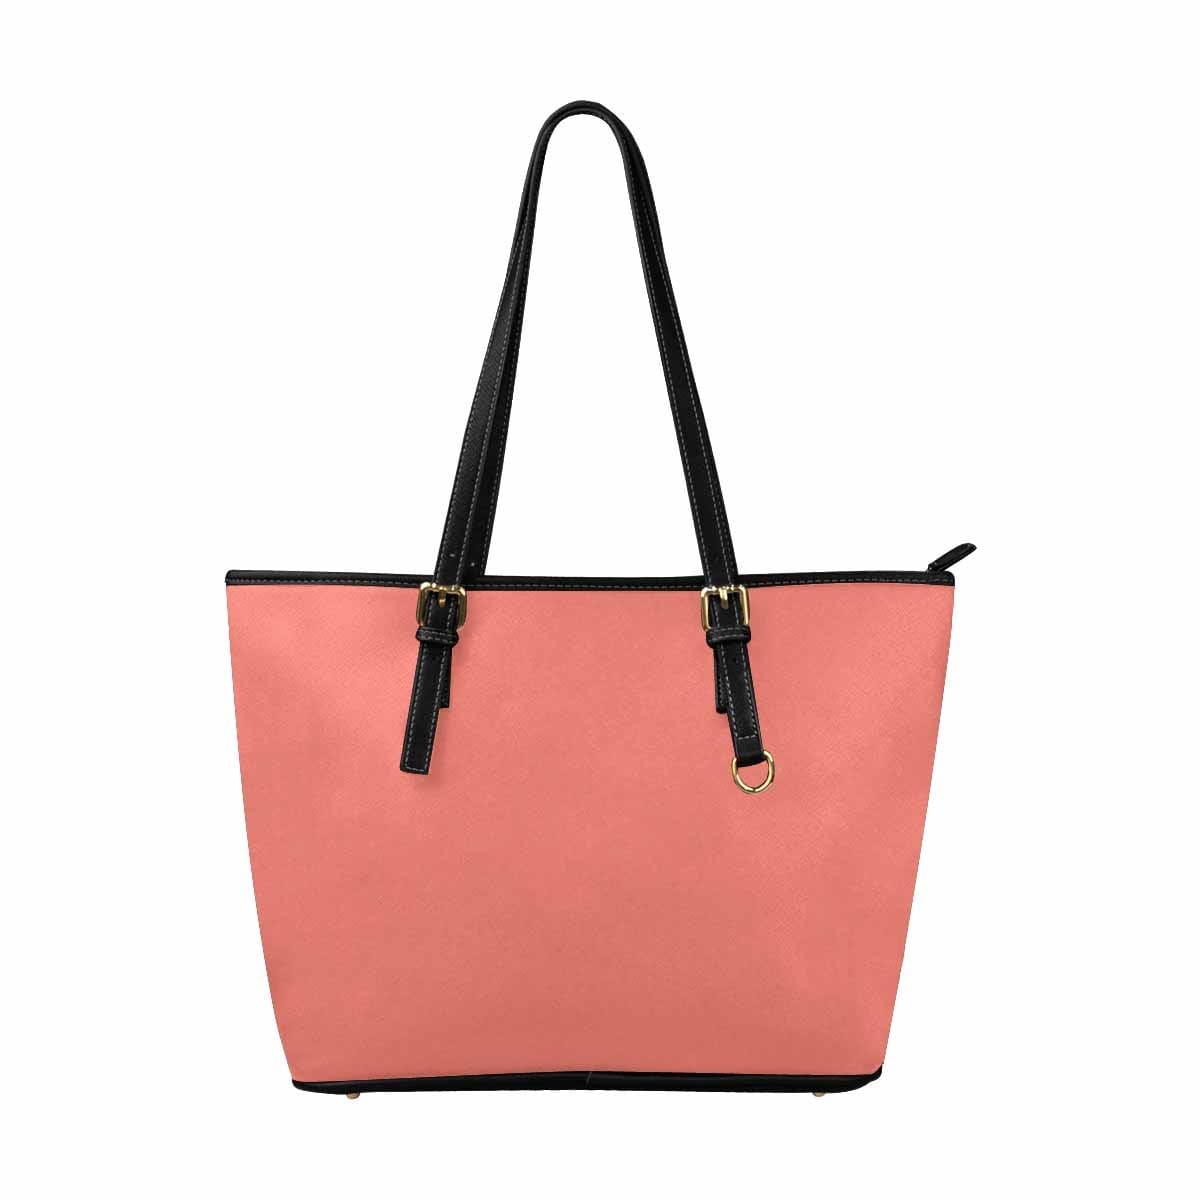 Large Leather Tote Shoulder Bag - Salmon Red - Bags | Leather Tote Bags